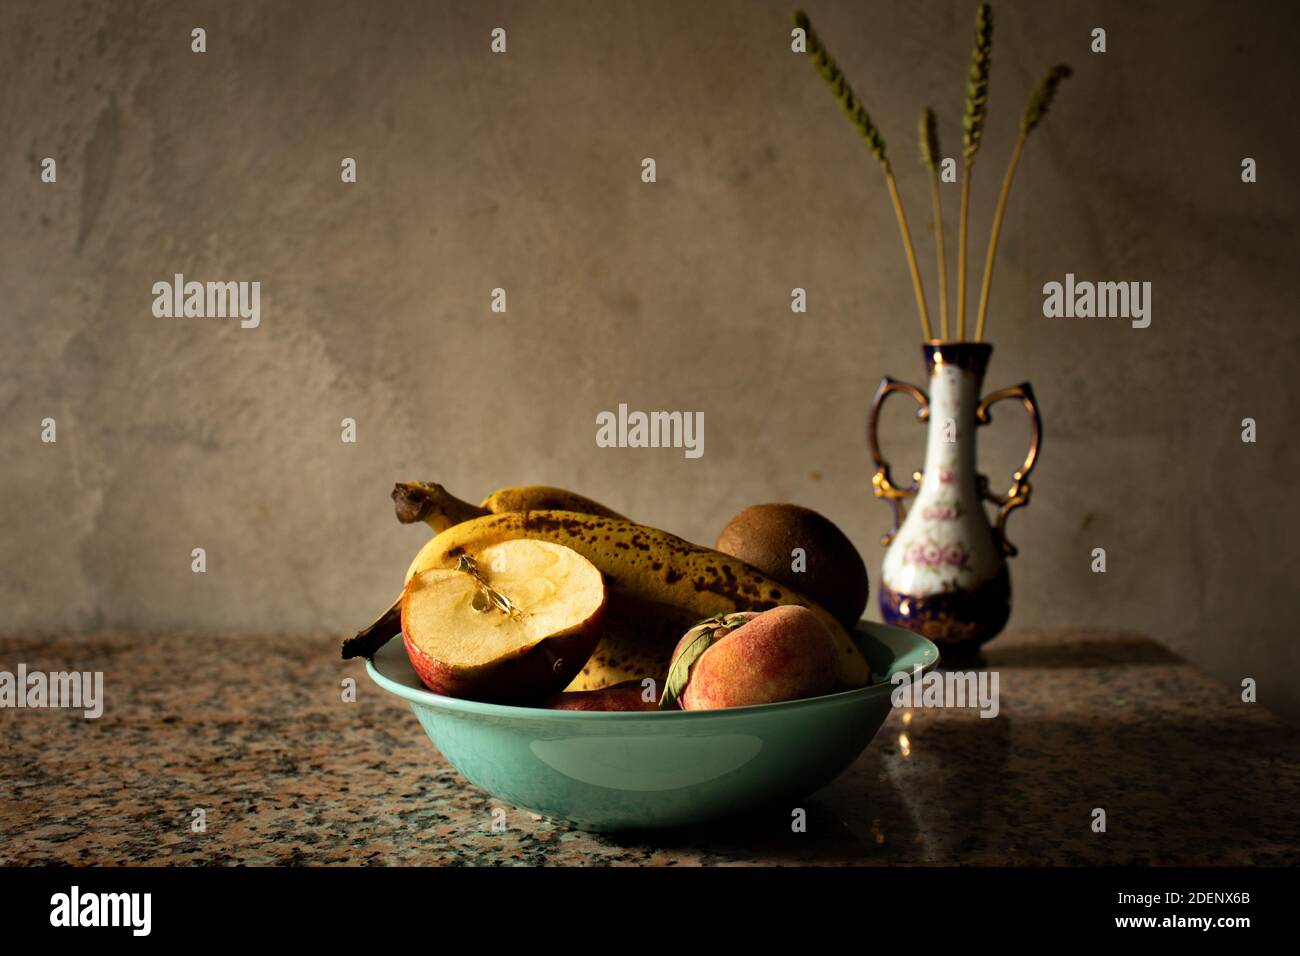 Still life of fruit sitting in a plate with ears of wheat in a jar blurring  in the background. Rustic mood with dim lights and golden tones Stock Photo  - Alamy